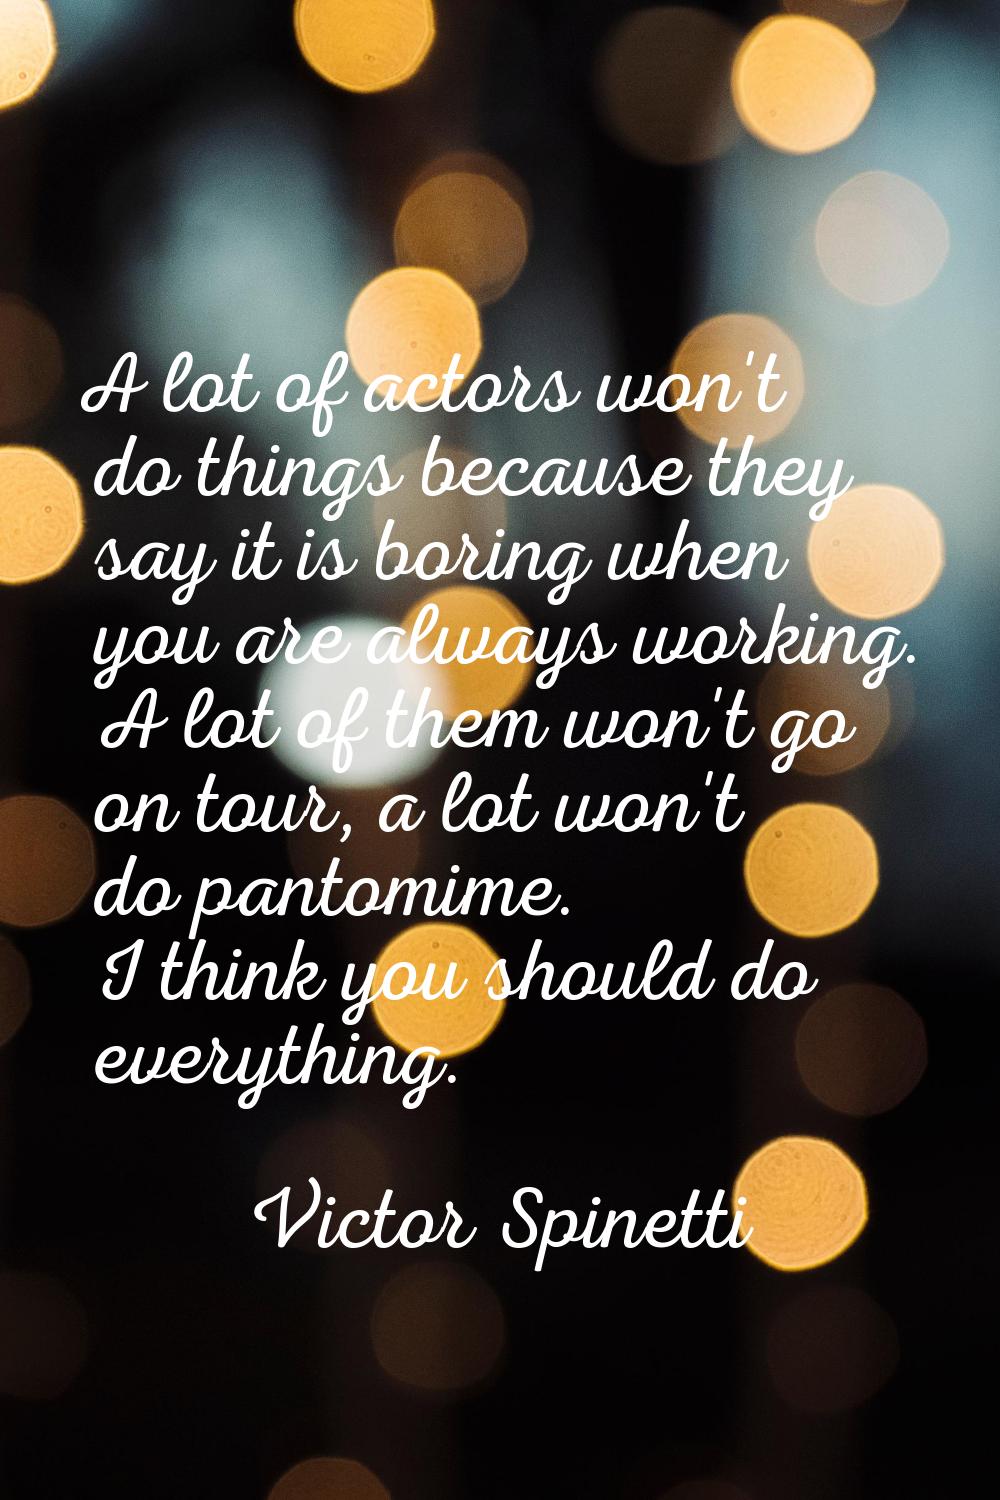 A lot of actors won't do things because they say it is boring when you are always working. A lot of